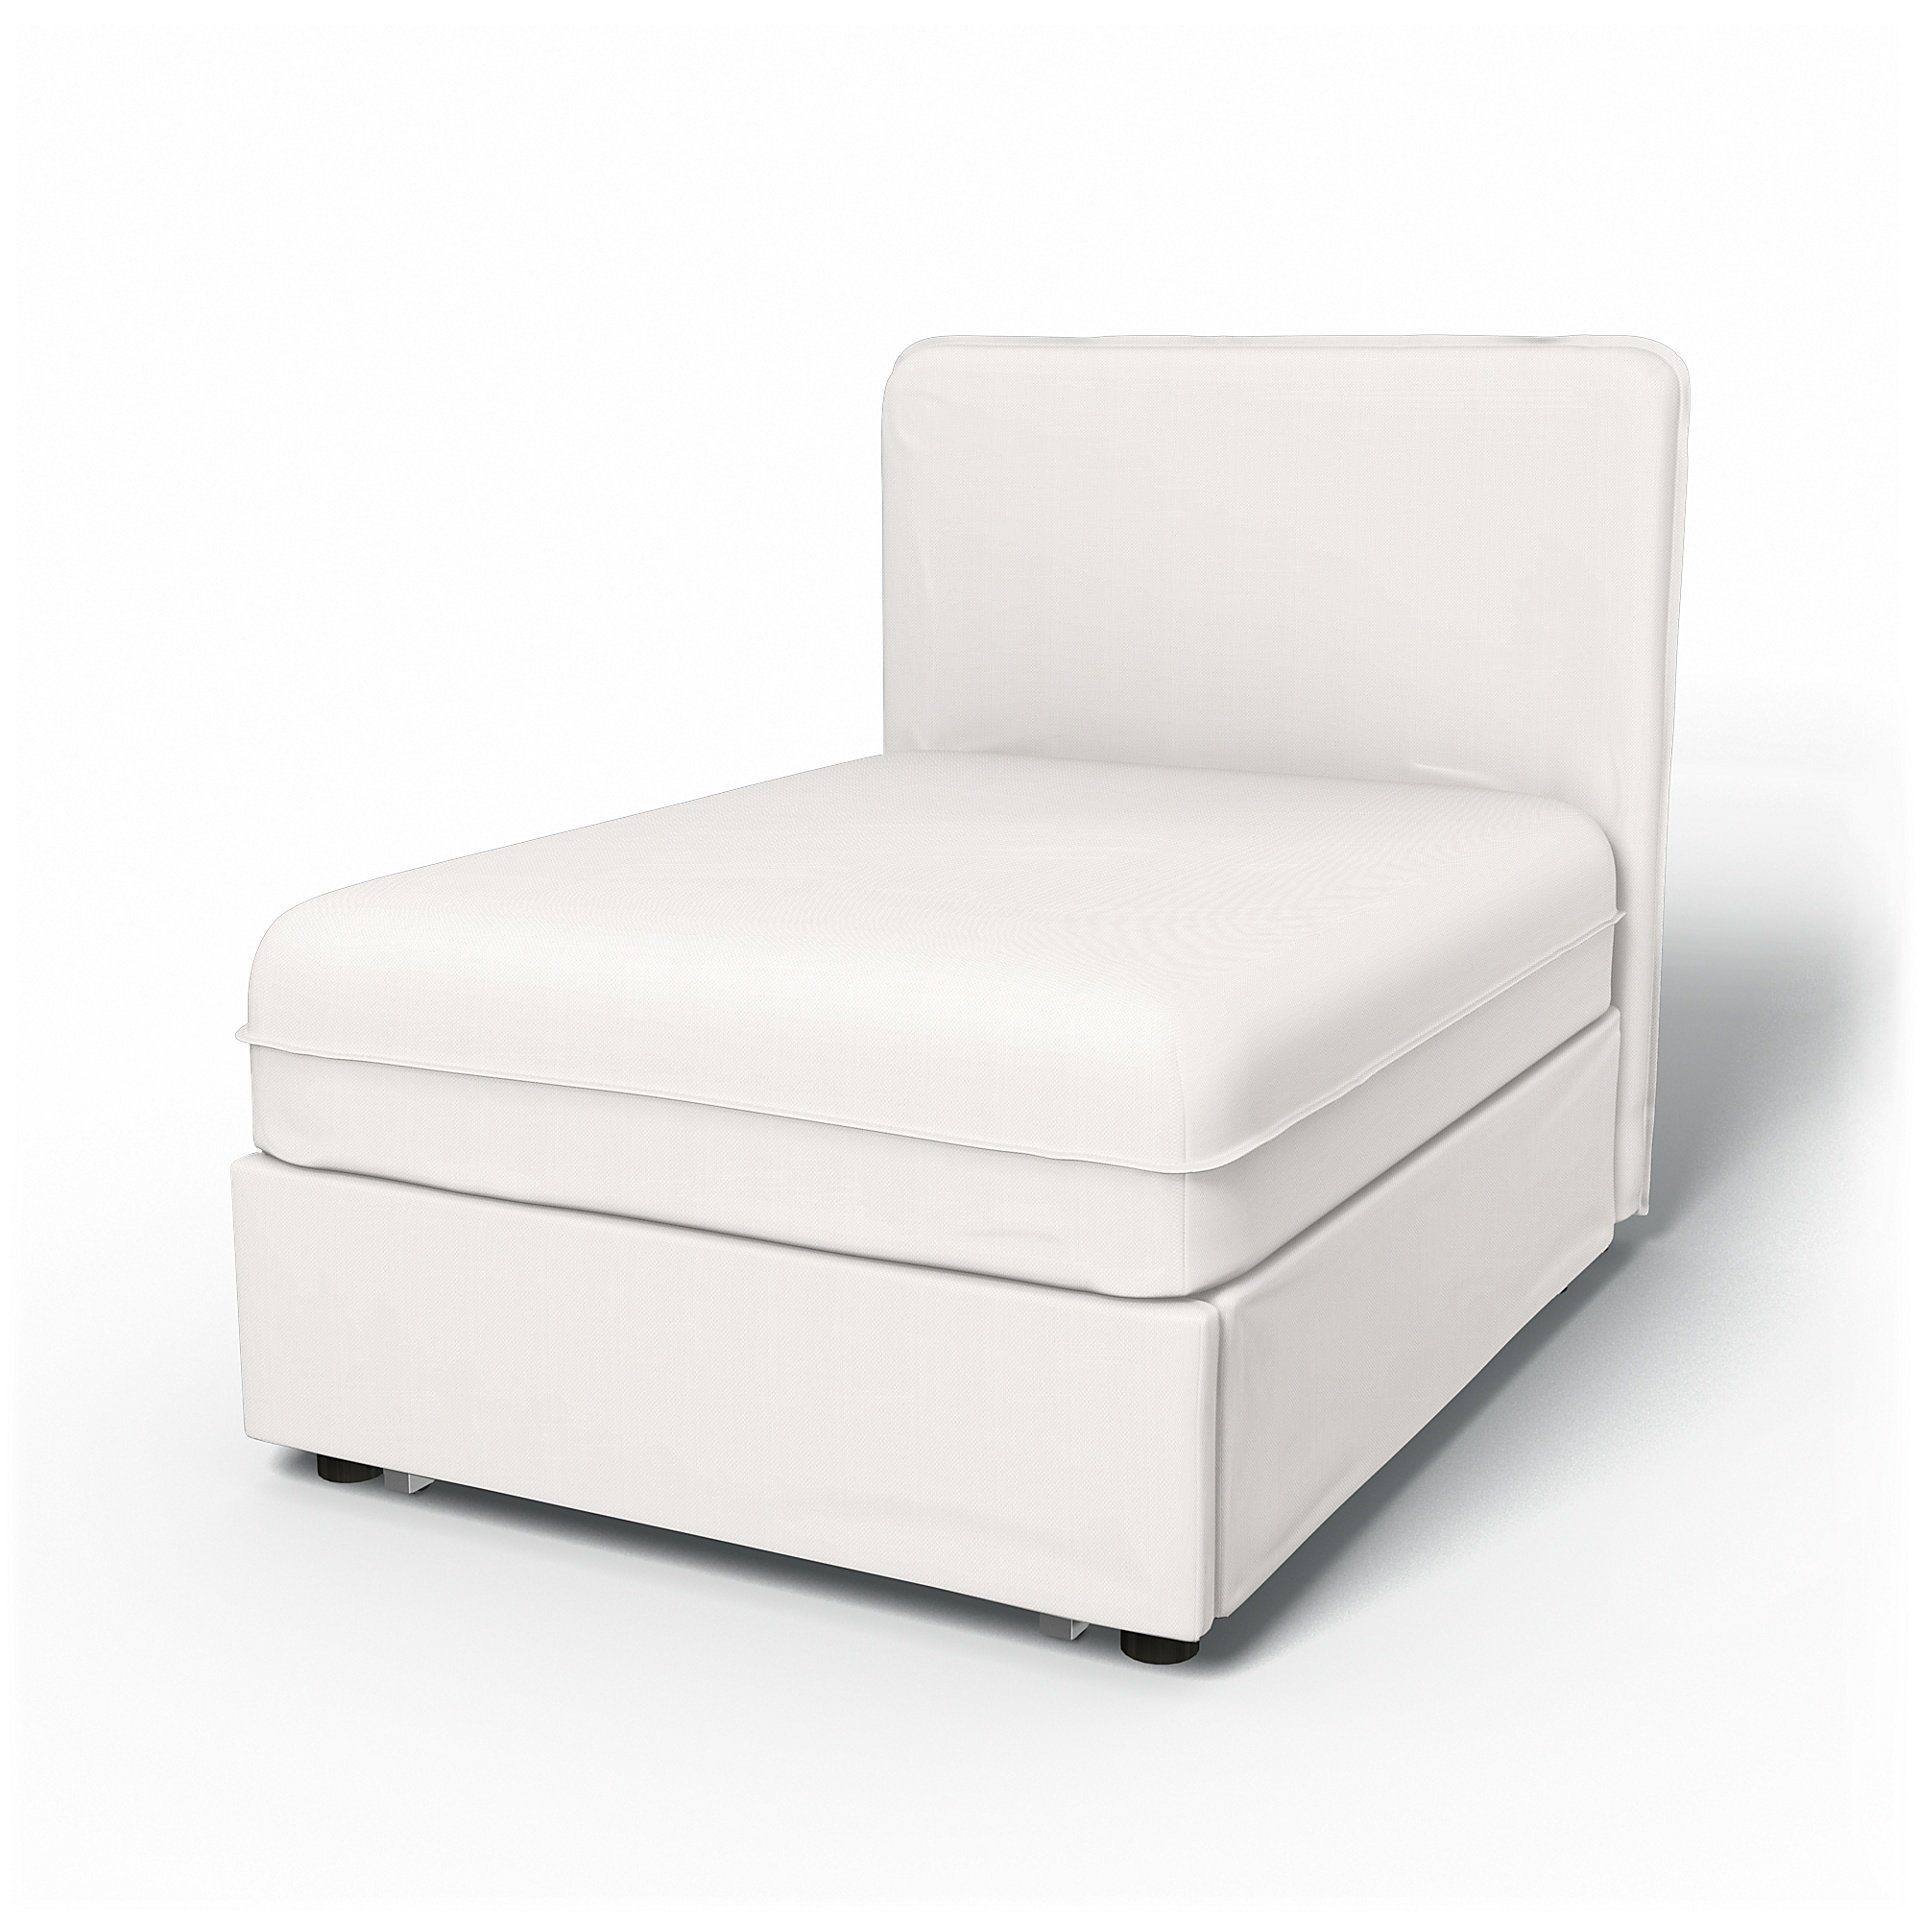 IKEA - Vallentuna Seat Module with Low Back Sofa Bed Cover 80x100 cm 32x39in, Soft White, Linen - Be